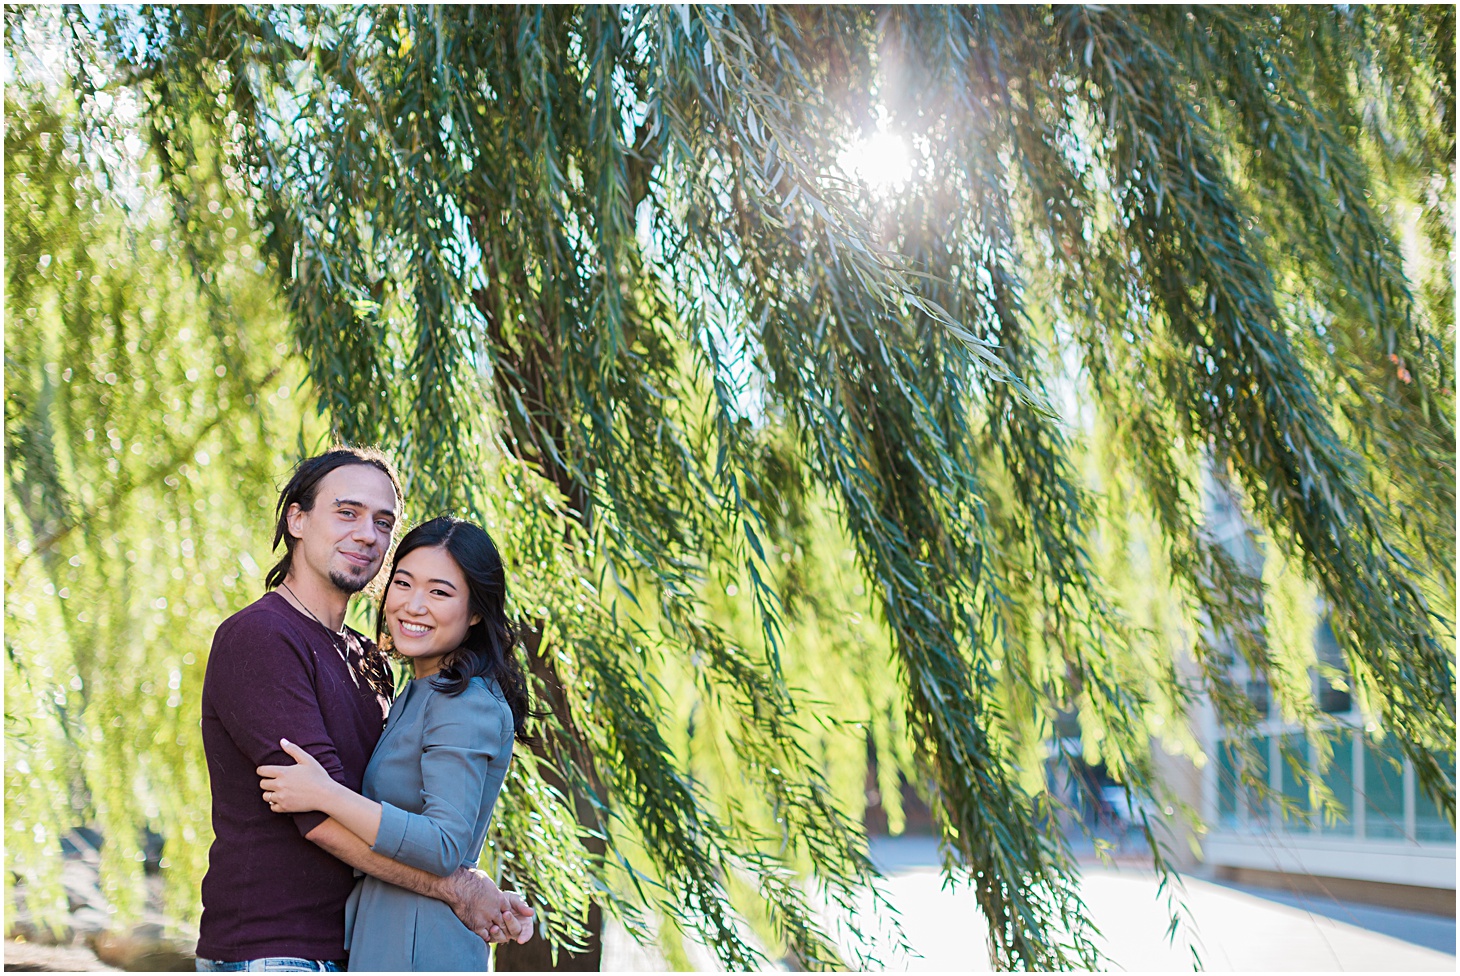 Fall in Boston Sunset Engagement Session by Sarah Bradshaw Photography, MIT Engagement, Boston Engagement, Cambridge Engagement, New England Engagement Photographer